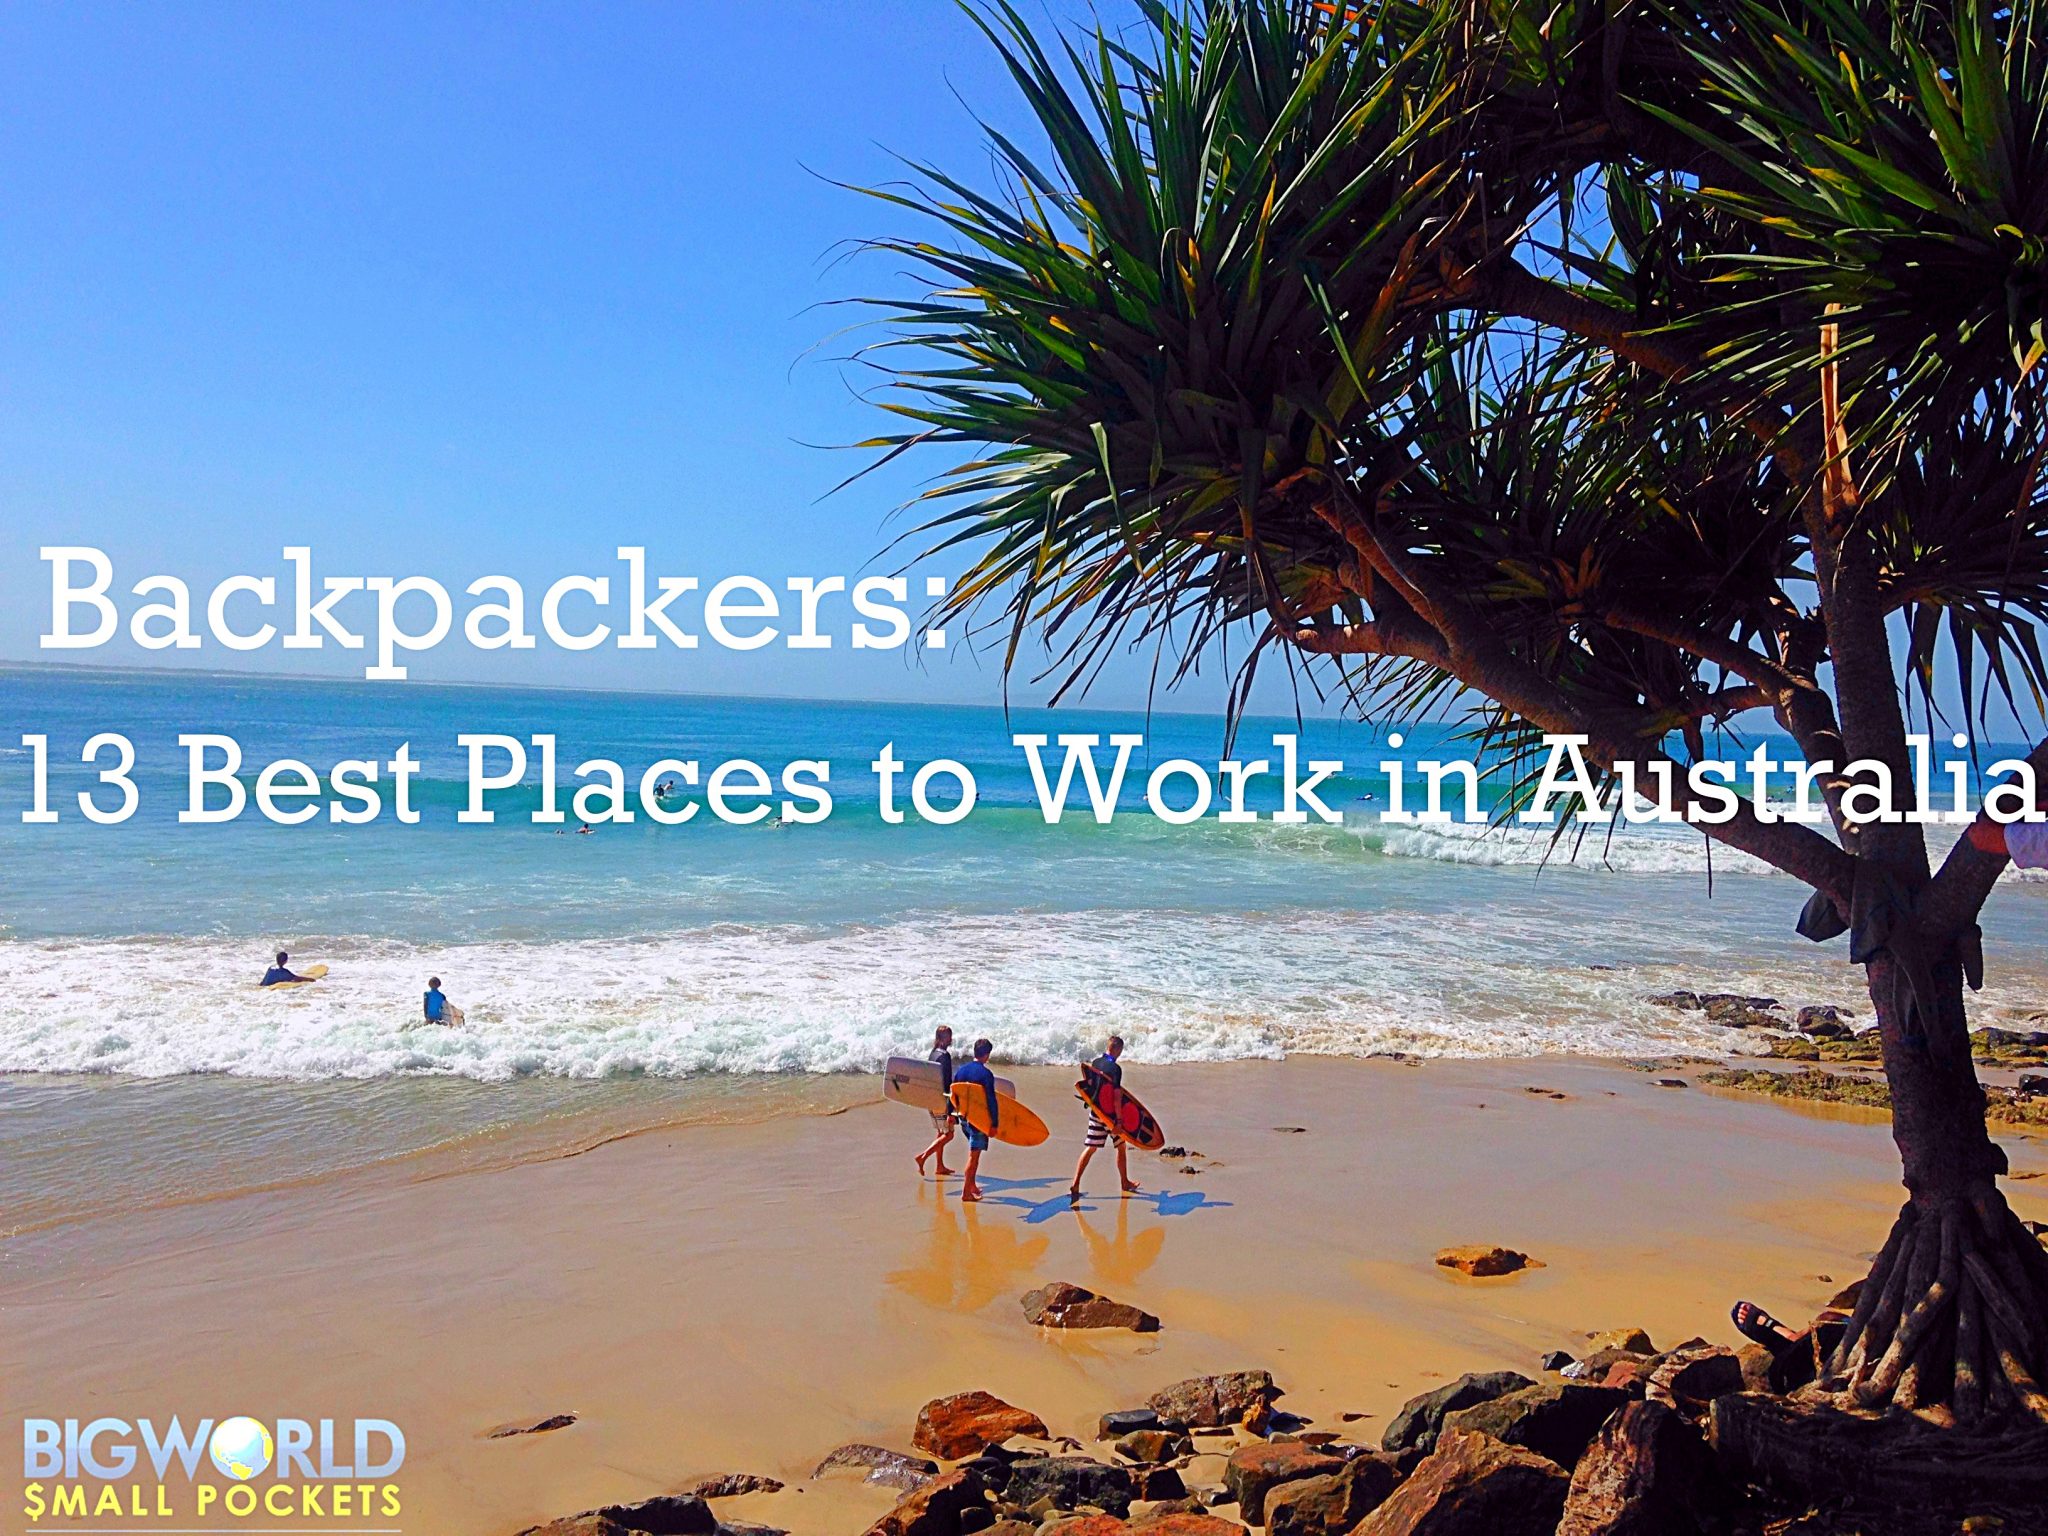 Backpackers: 13 BEST Places to Work in Australia - Big World Small Pockets